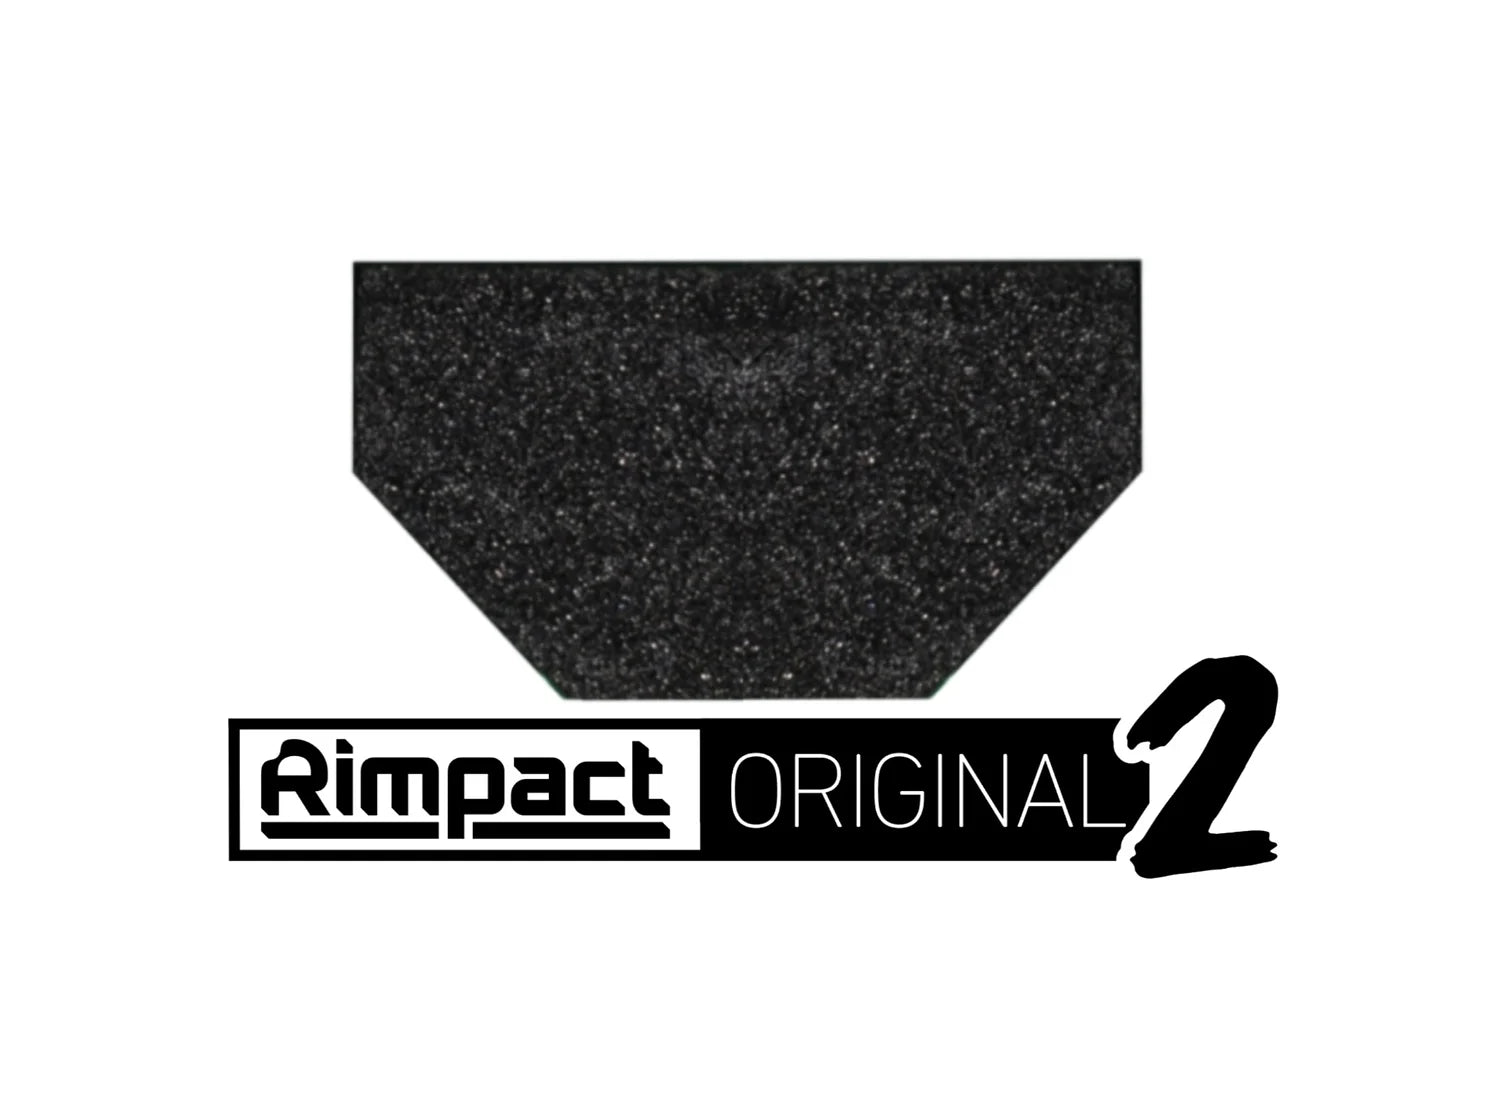 Rimpact Original V2 Tyre Inserts with Valves